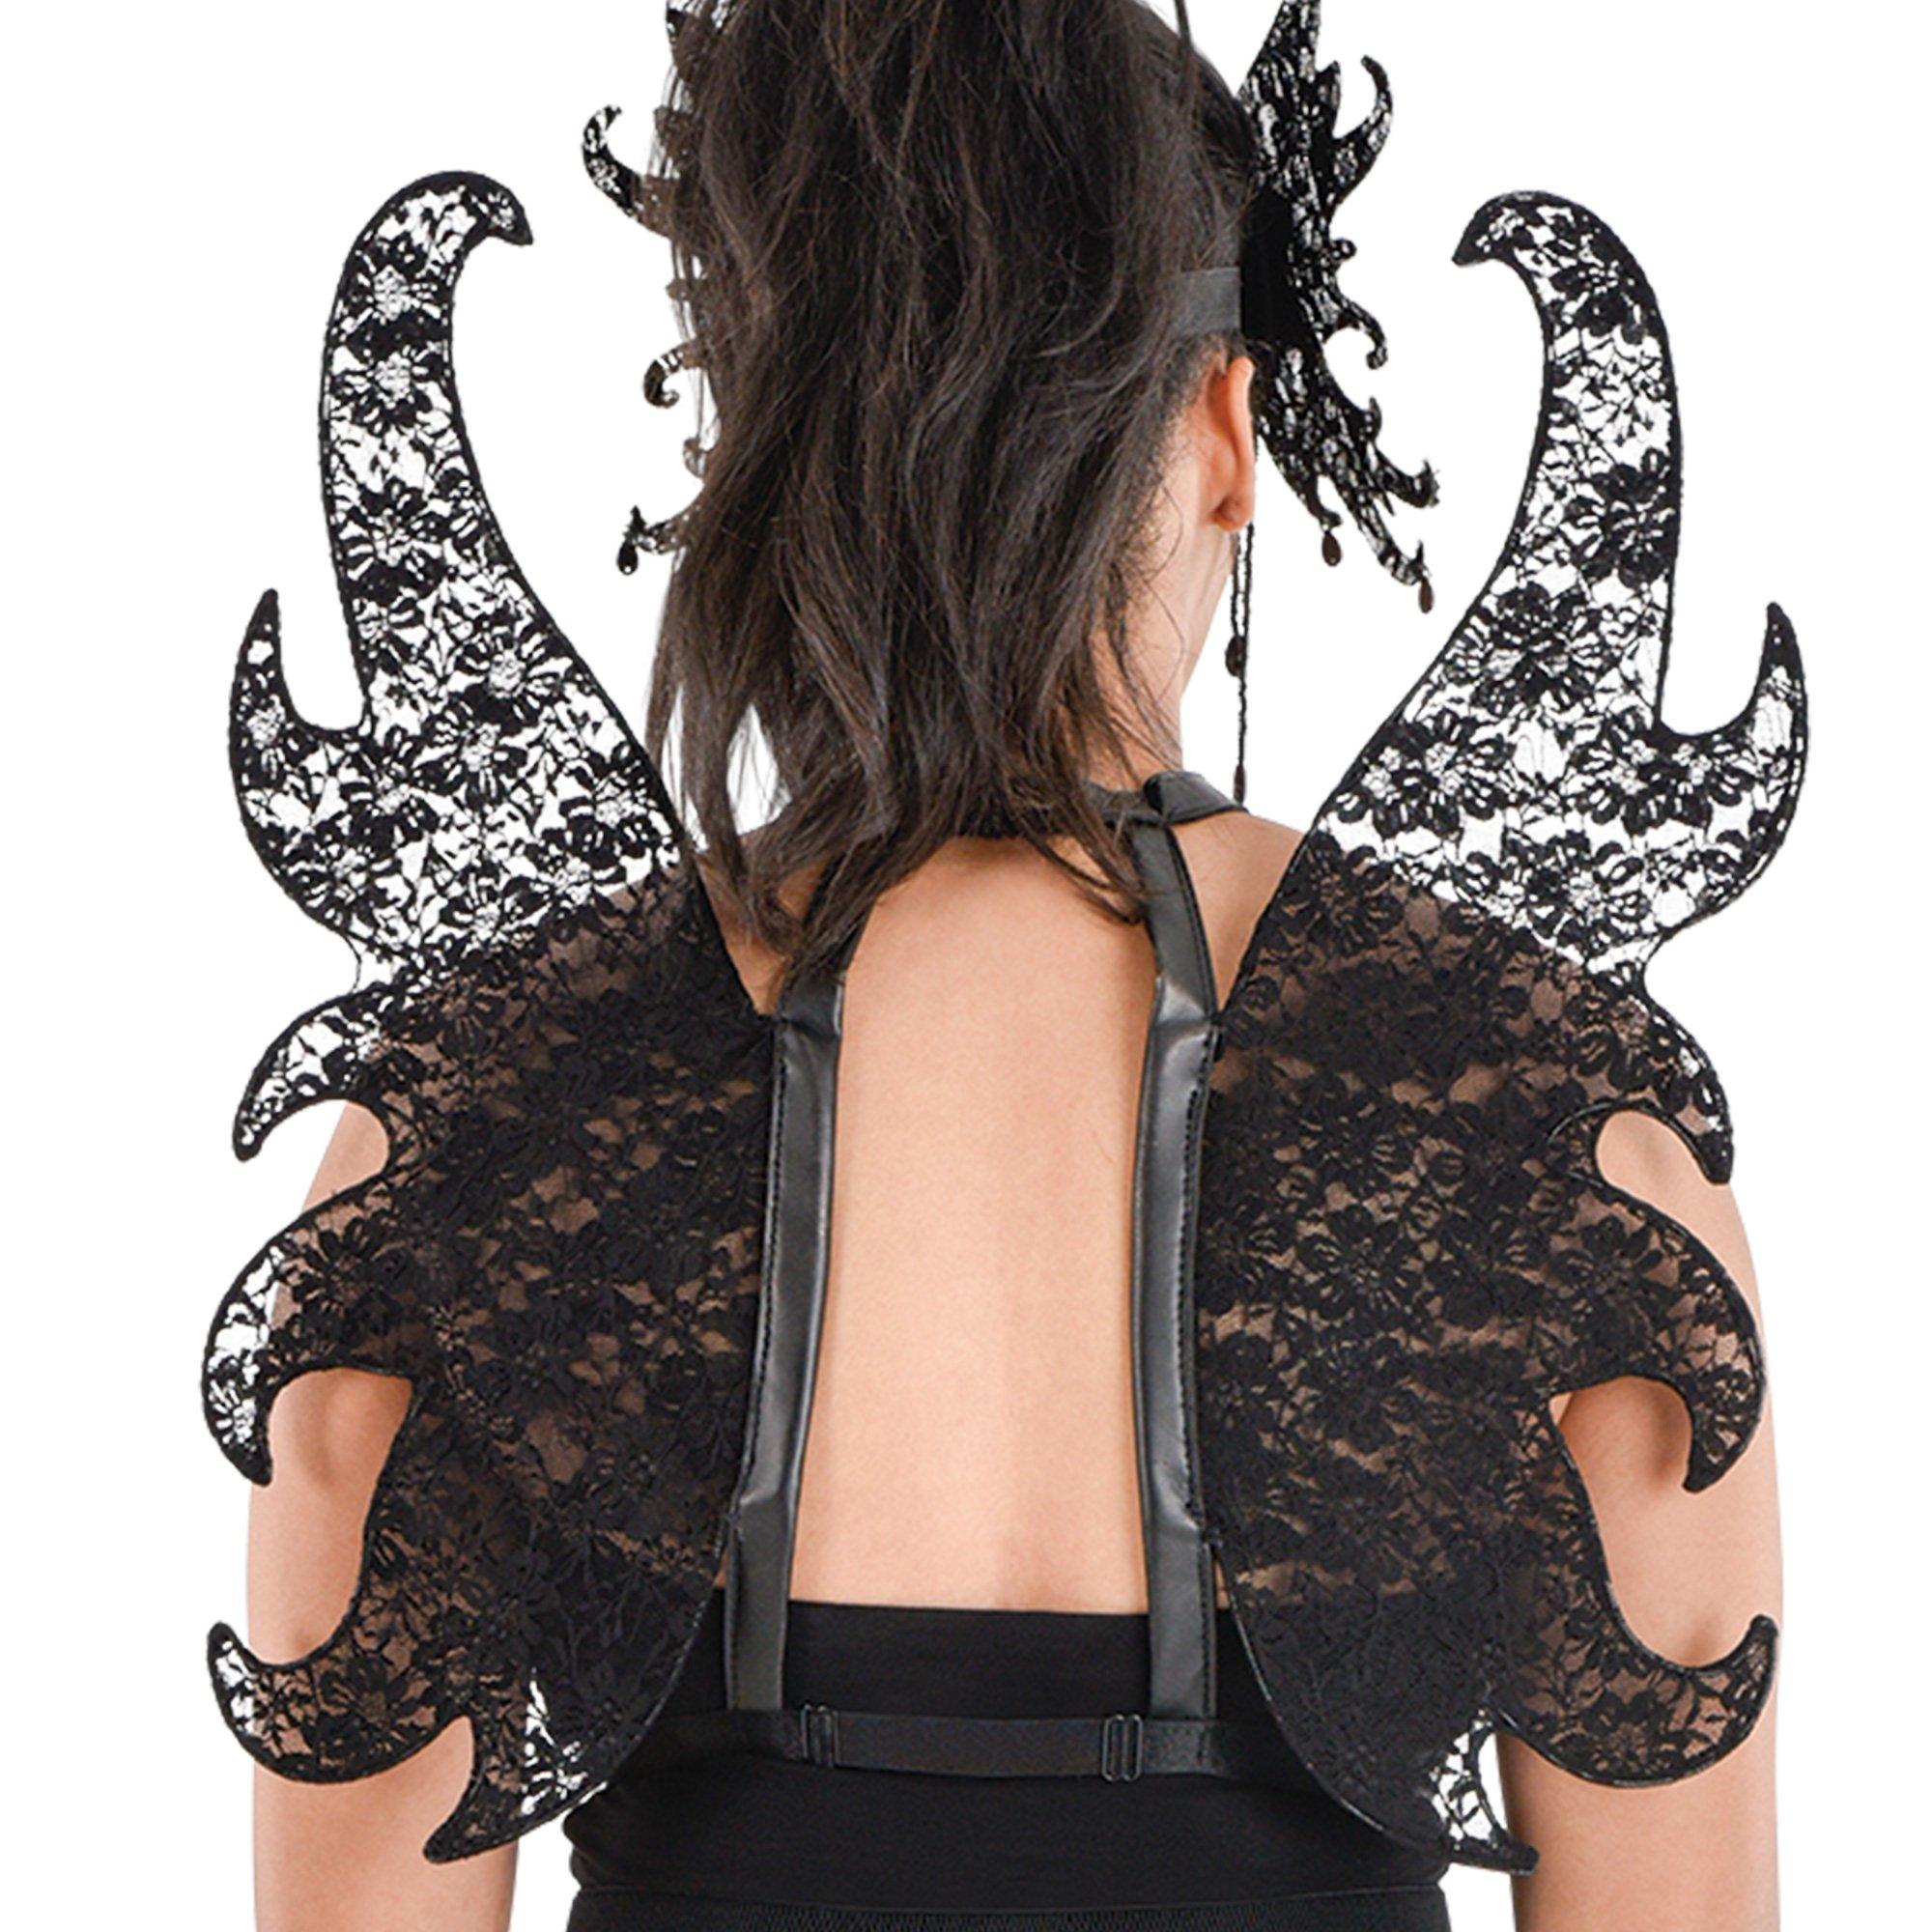 Adult Gothic Pixie Wing Harness